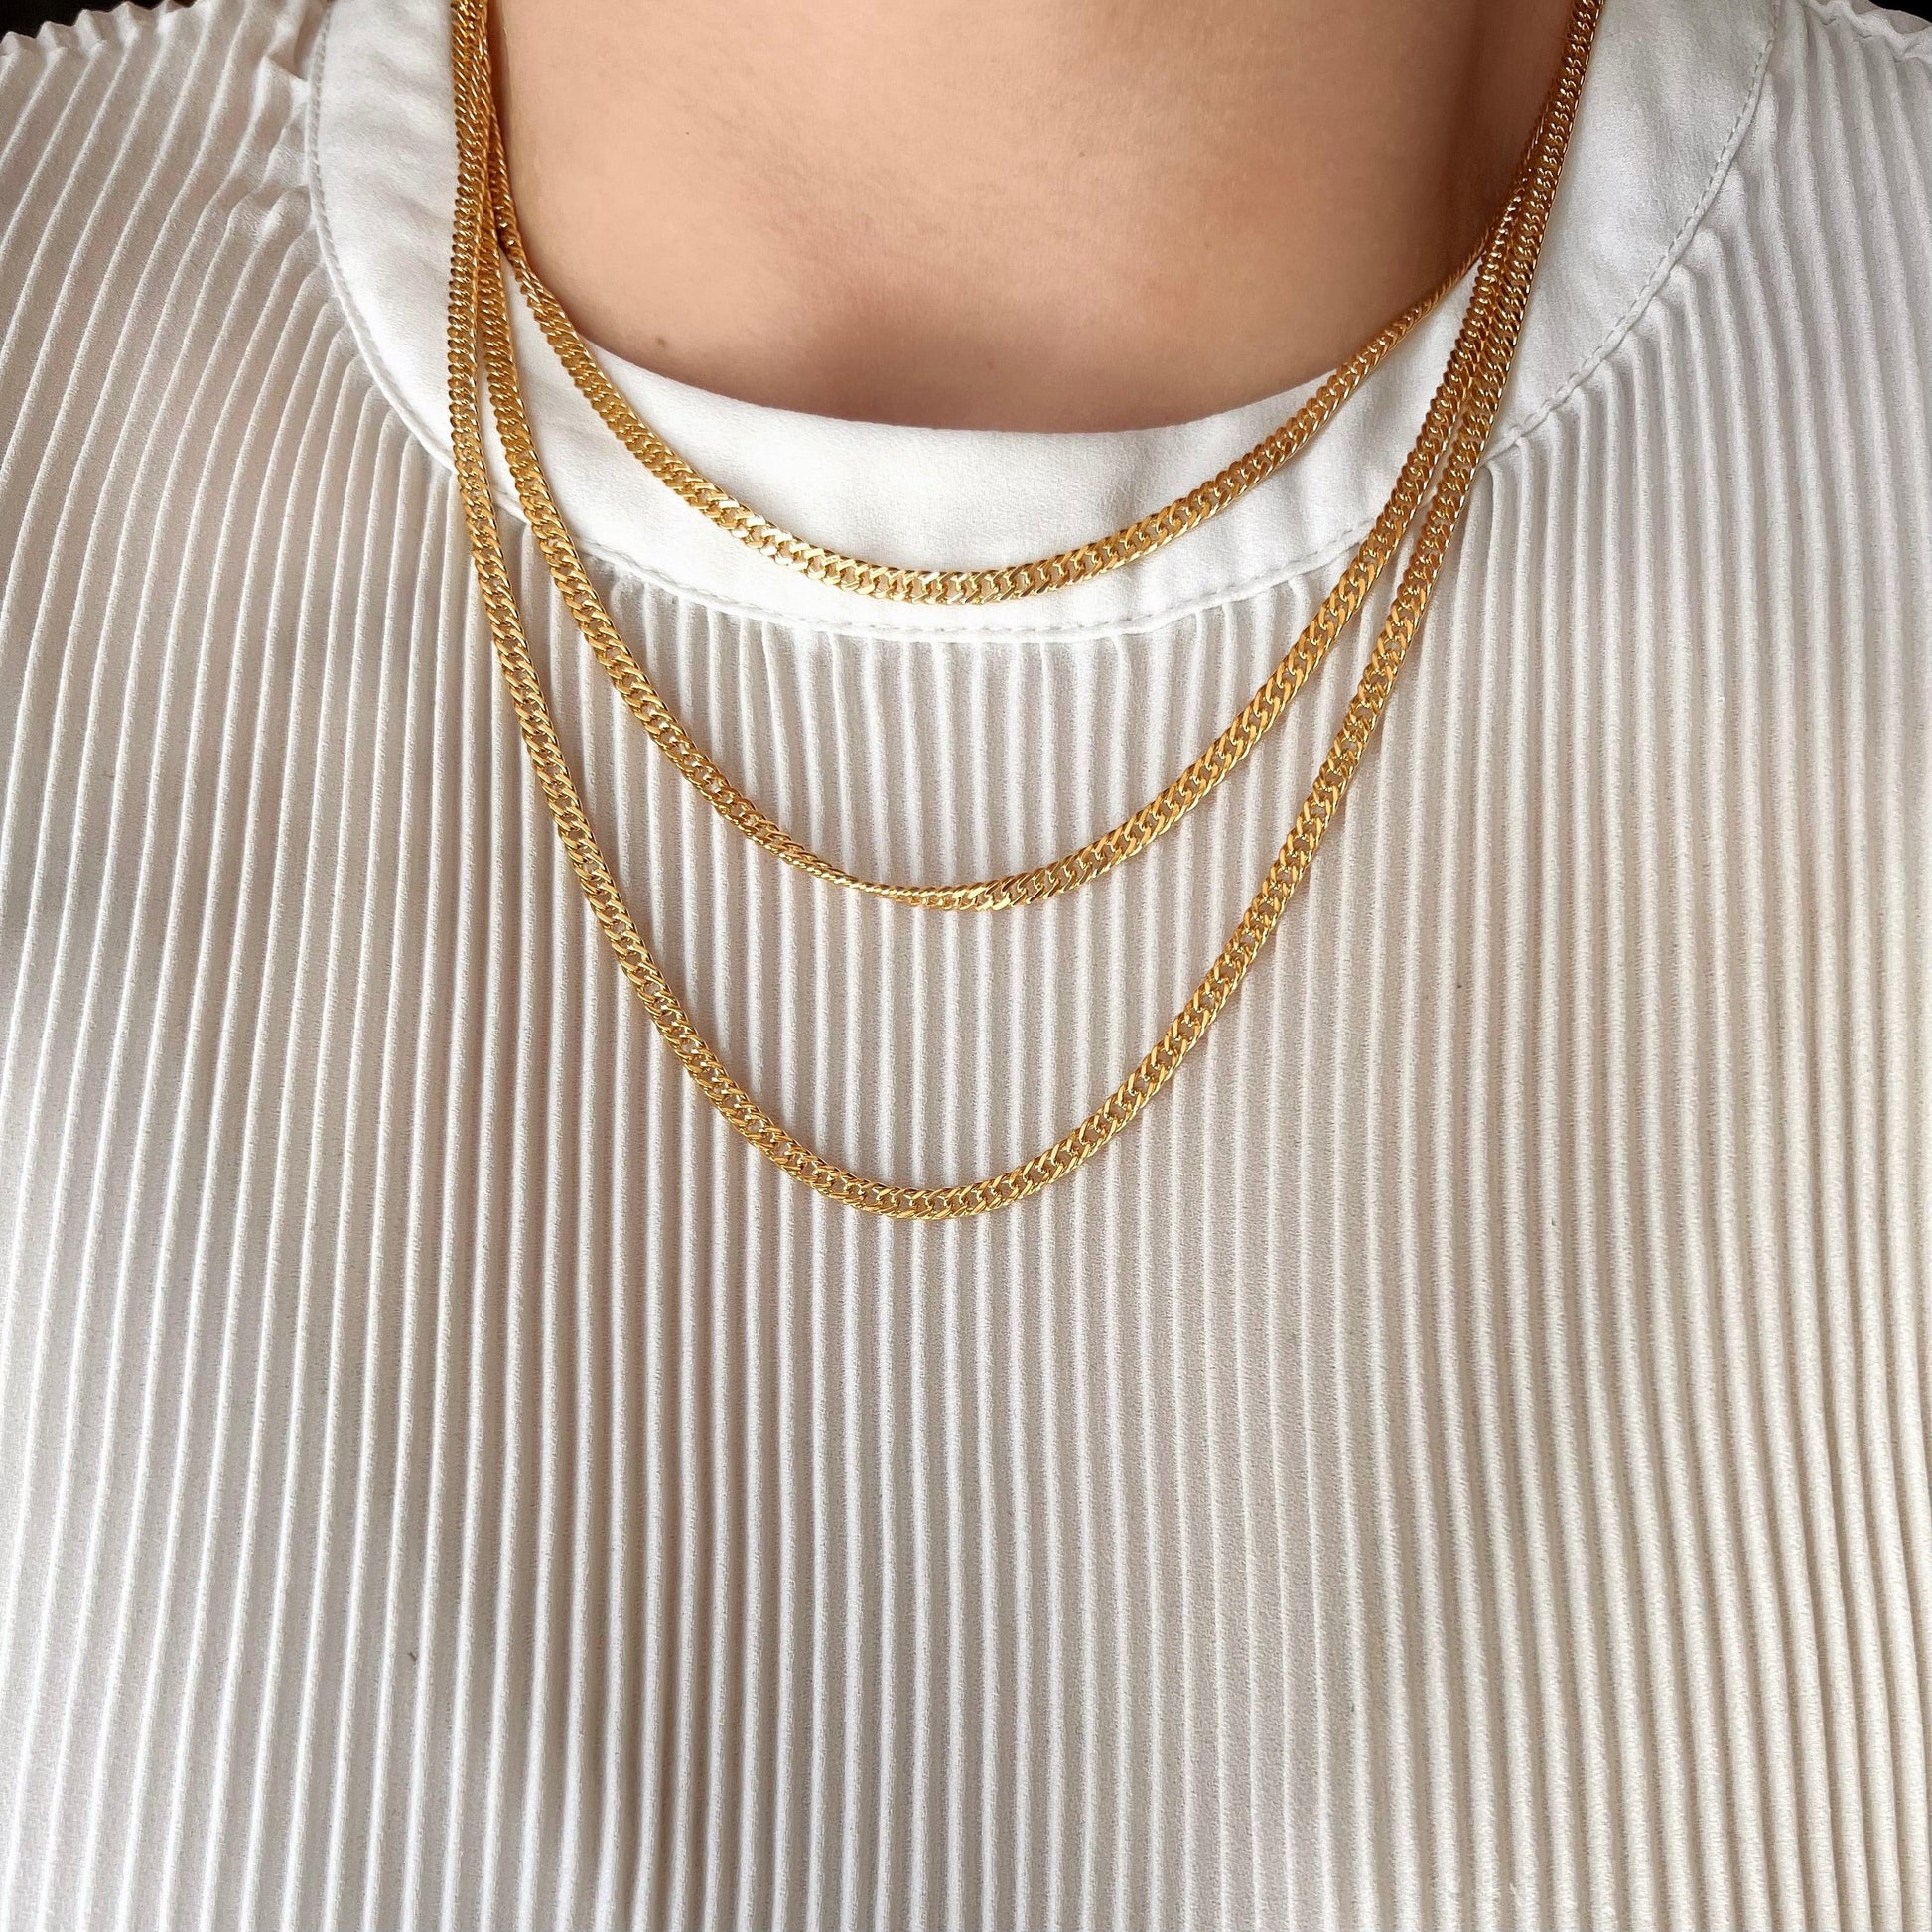 GoldFi 18k Gold Filled Double Curb Chain - Cuban